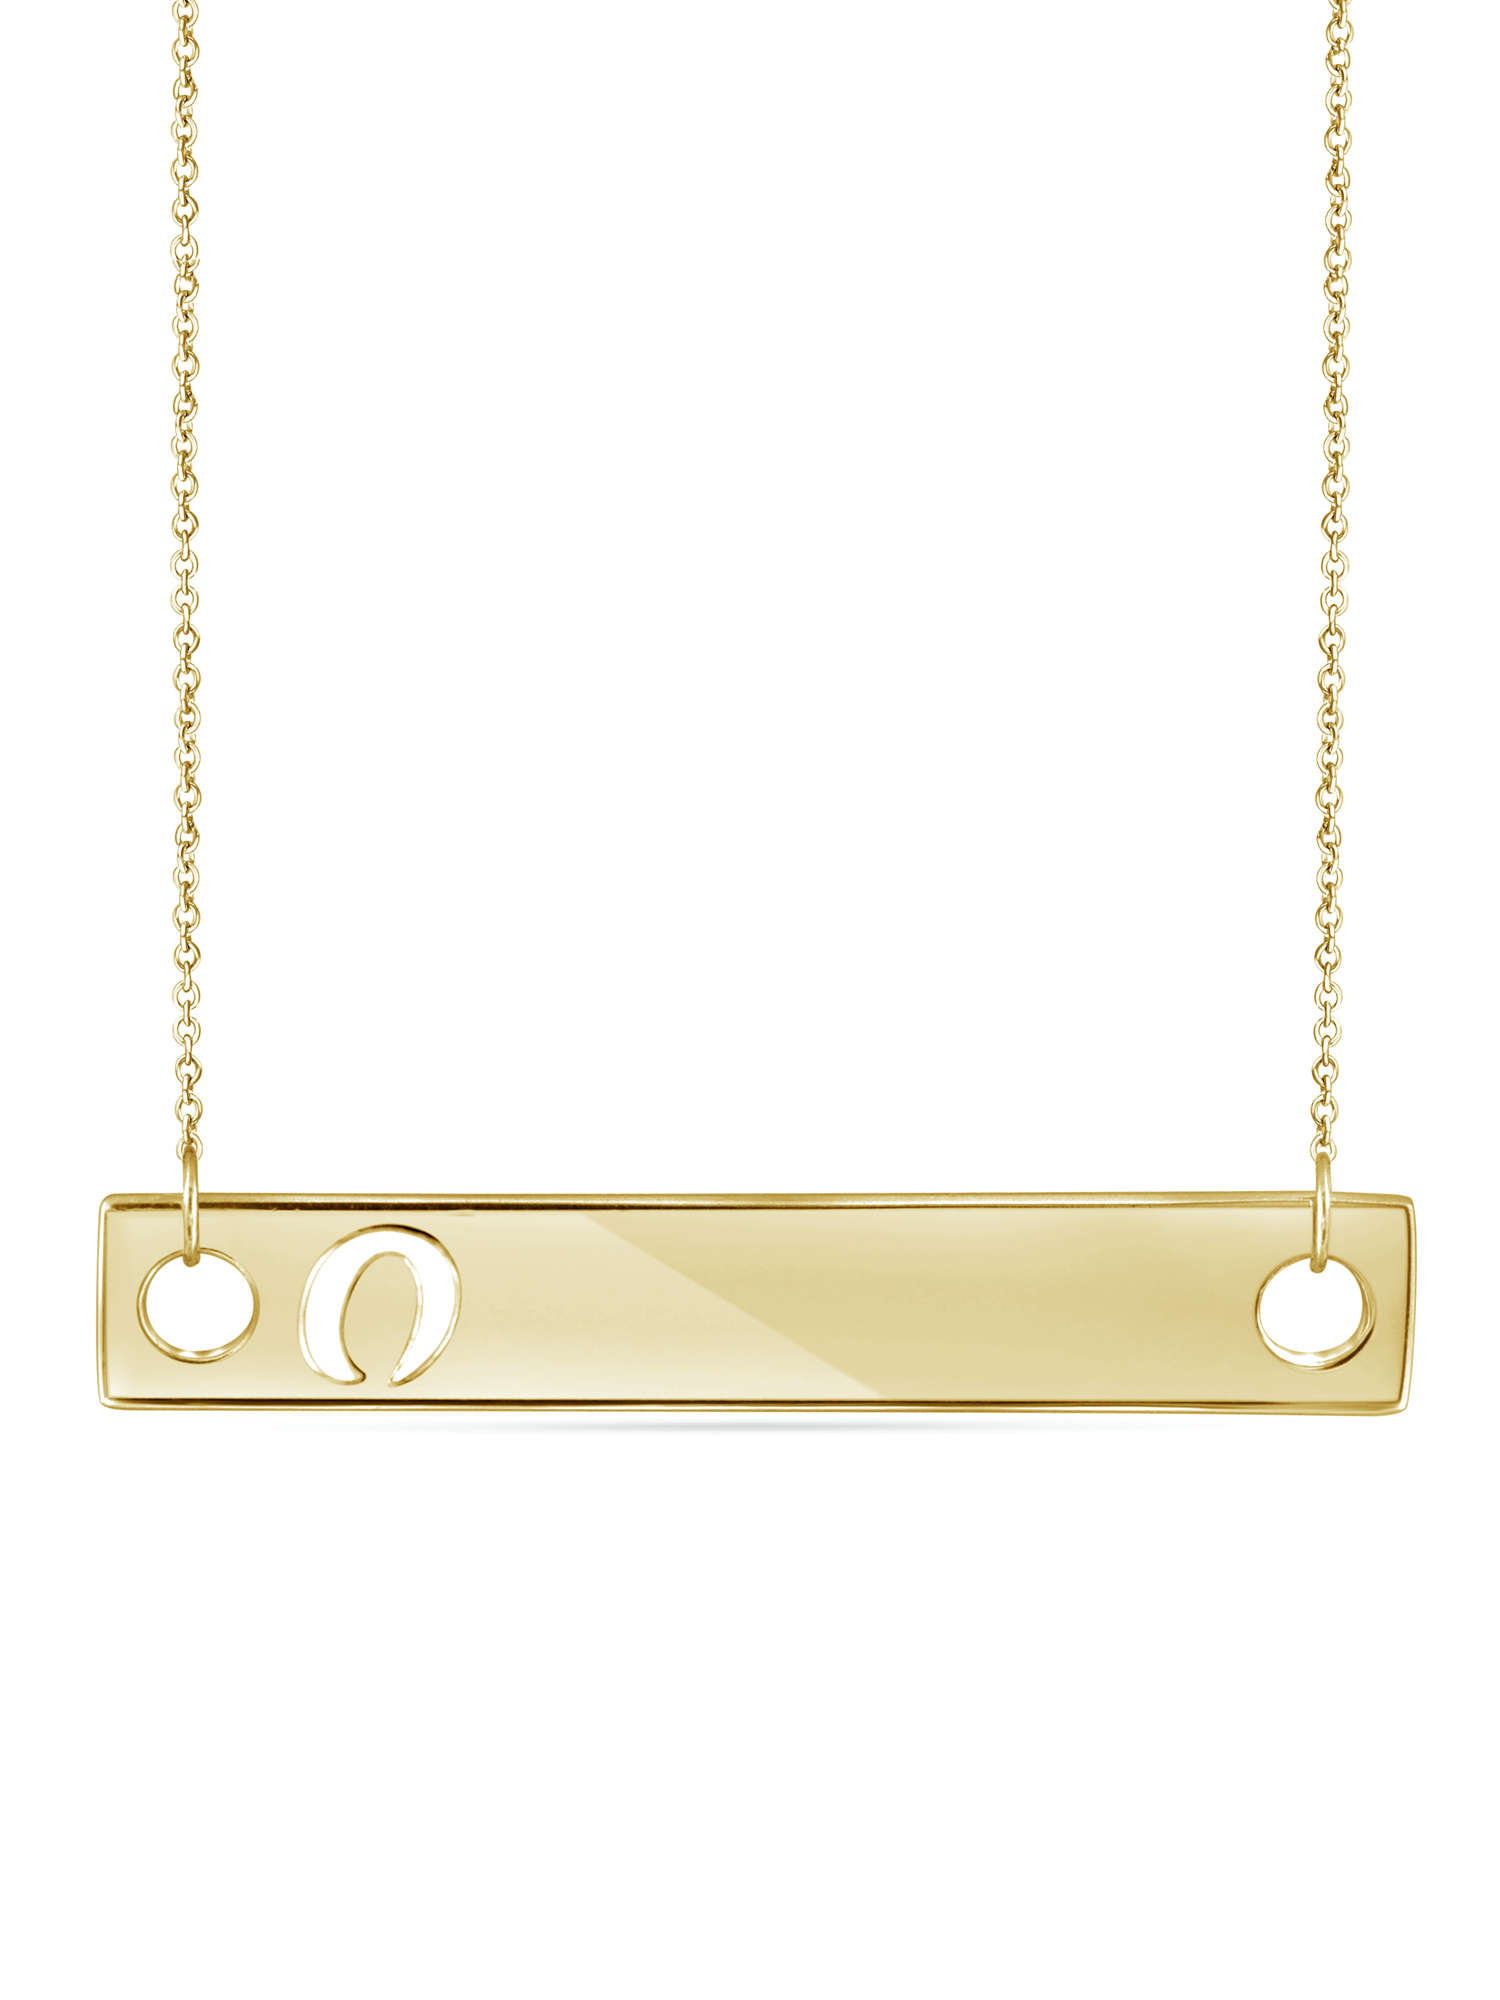 O Initial 14k Gold Over Silver Bar Necklace